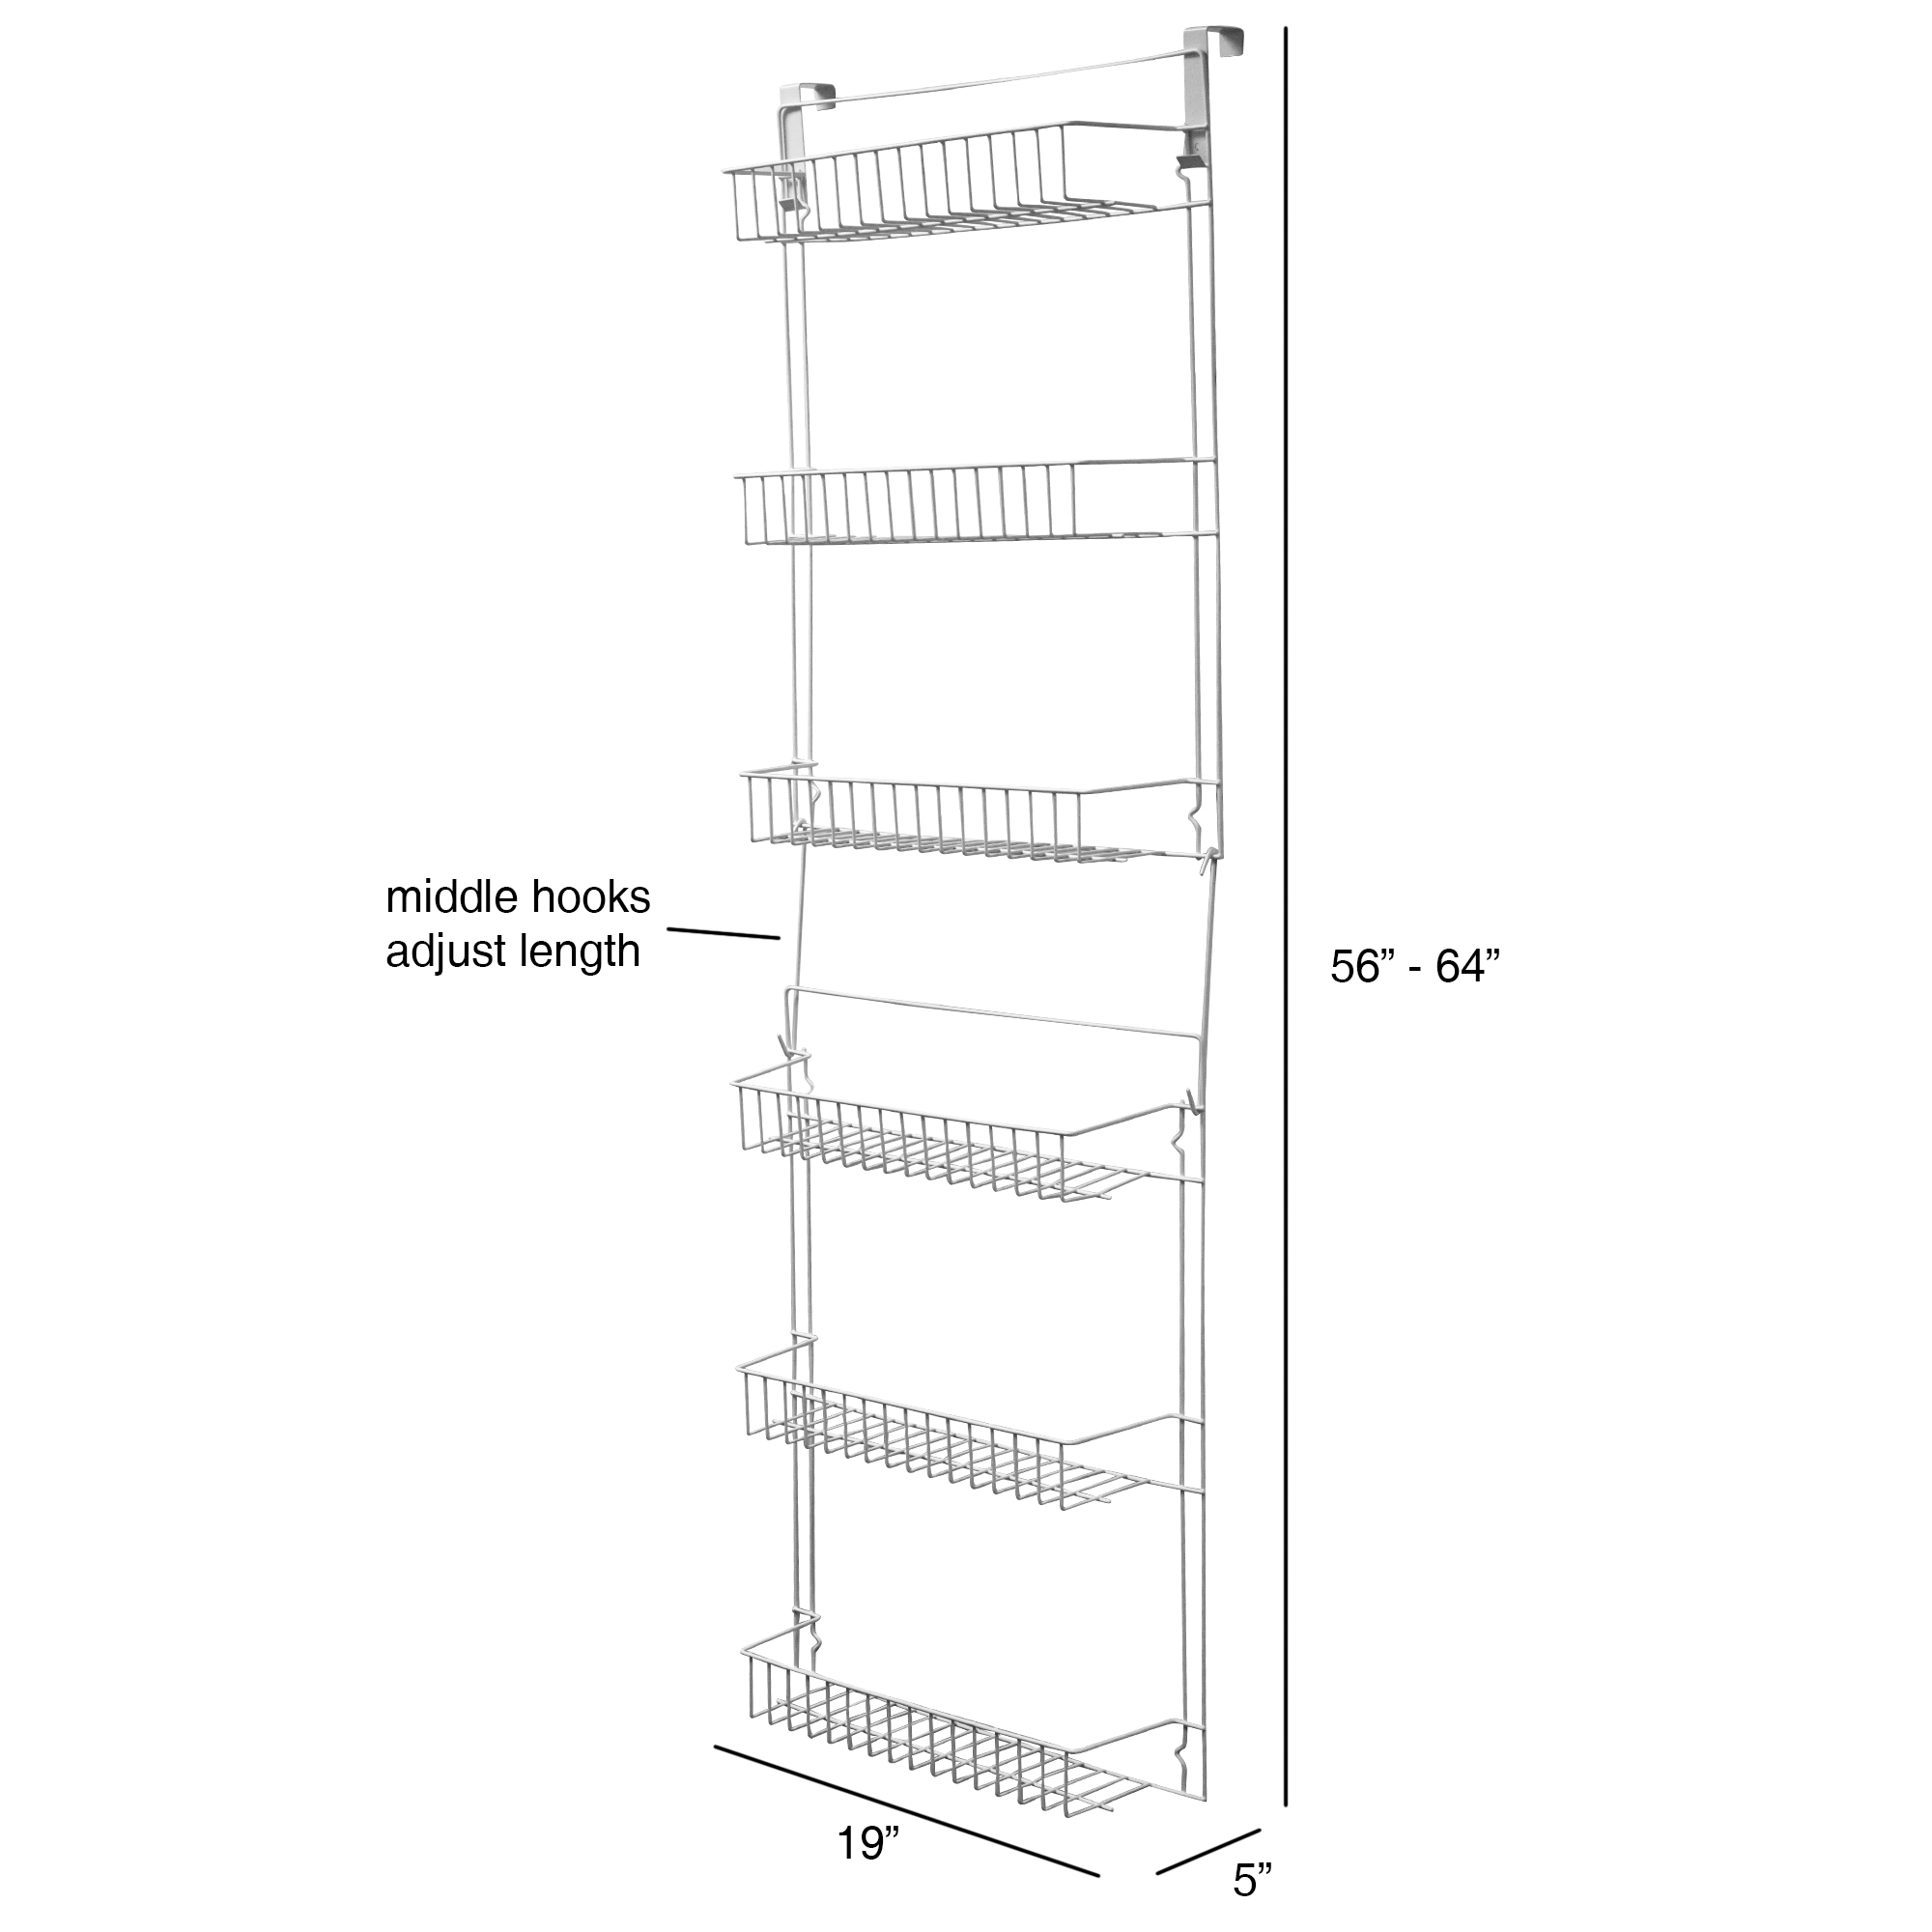 Lavish Home 6-Tier Powder-Coated Steel Adjustable Over the Door Organizer for Kitchen (White) - image 3 of 6